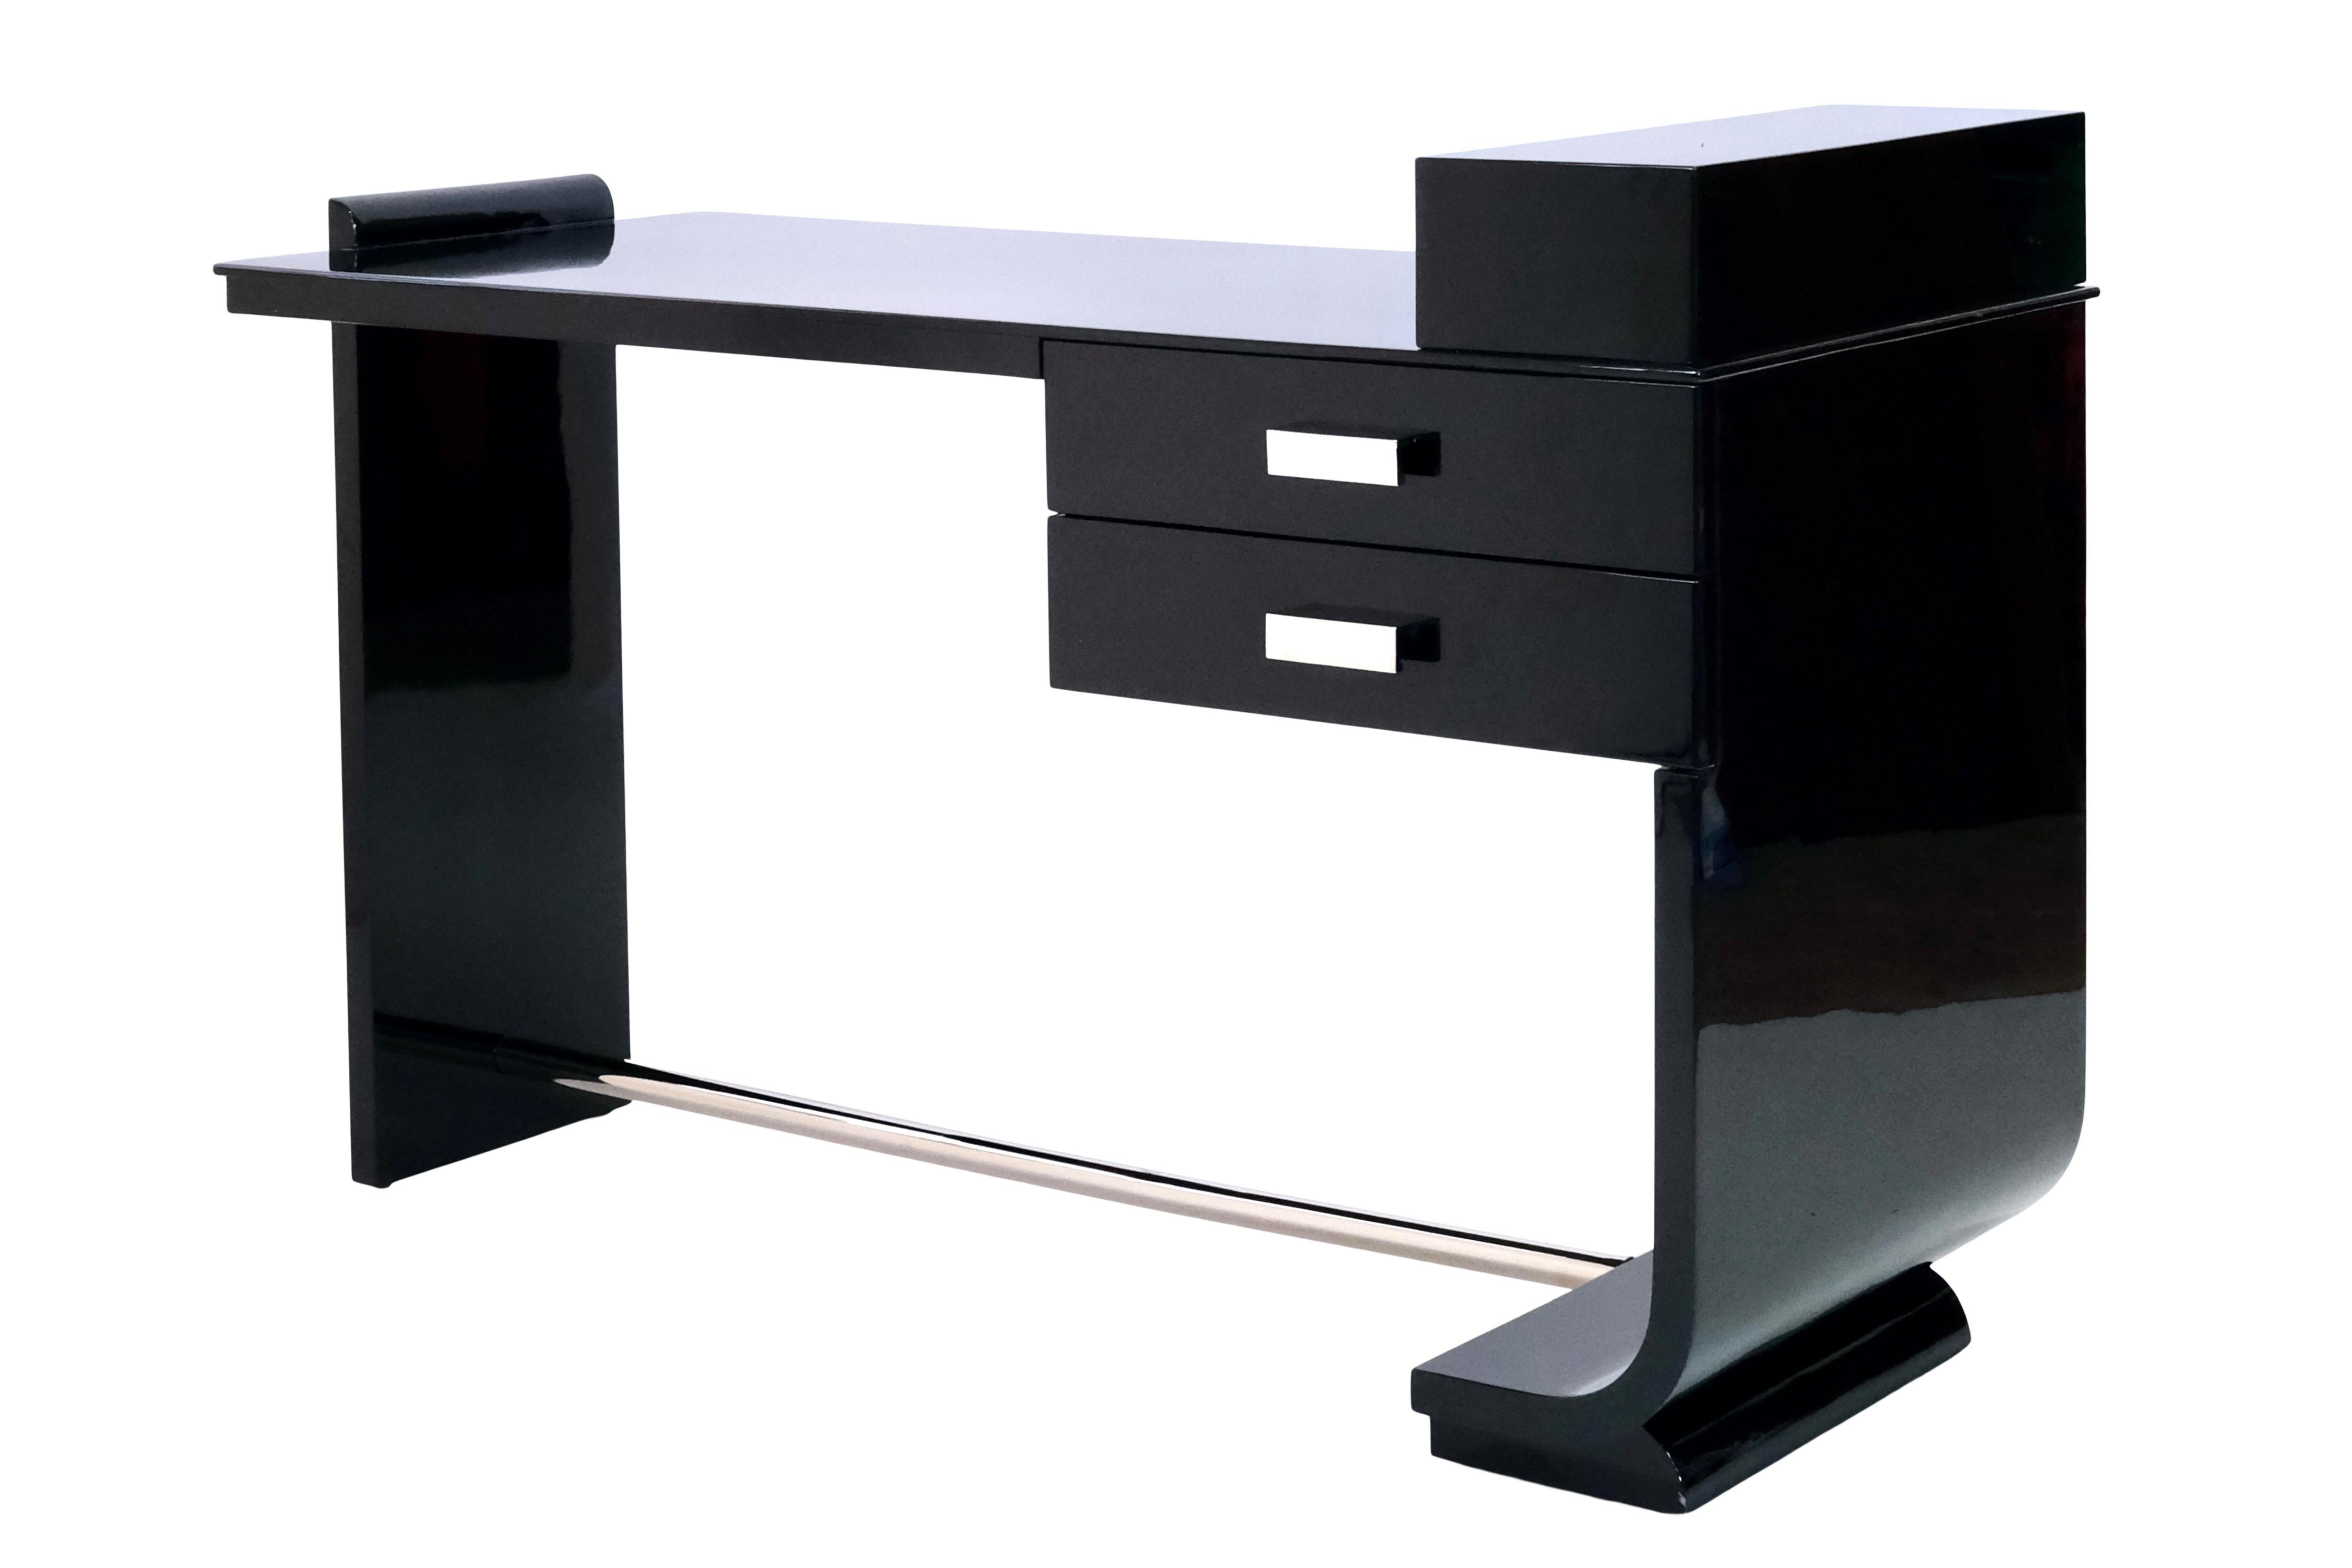 French Small Asymmetrical Art Deco Office Desk in Black Lacquer with Nickeled Fittings